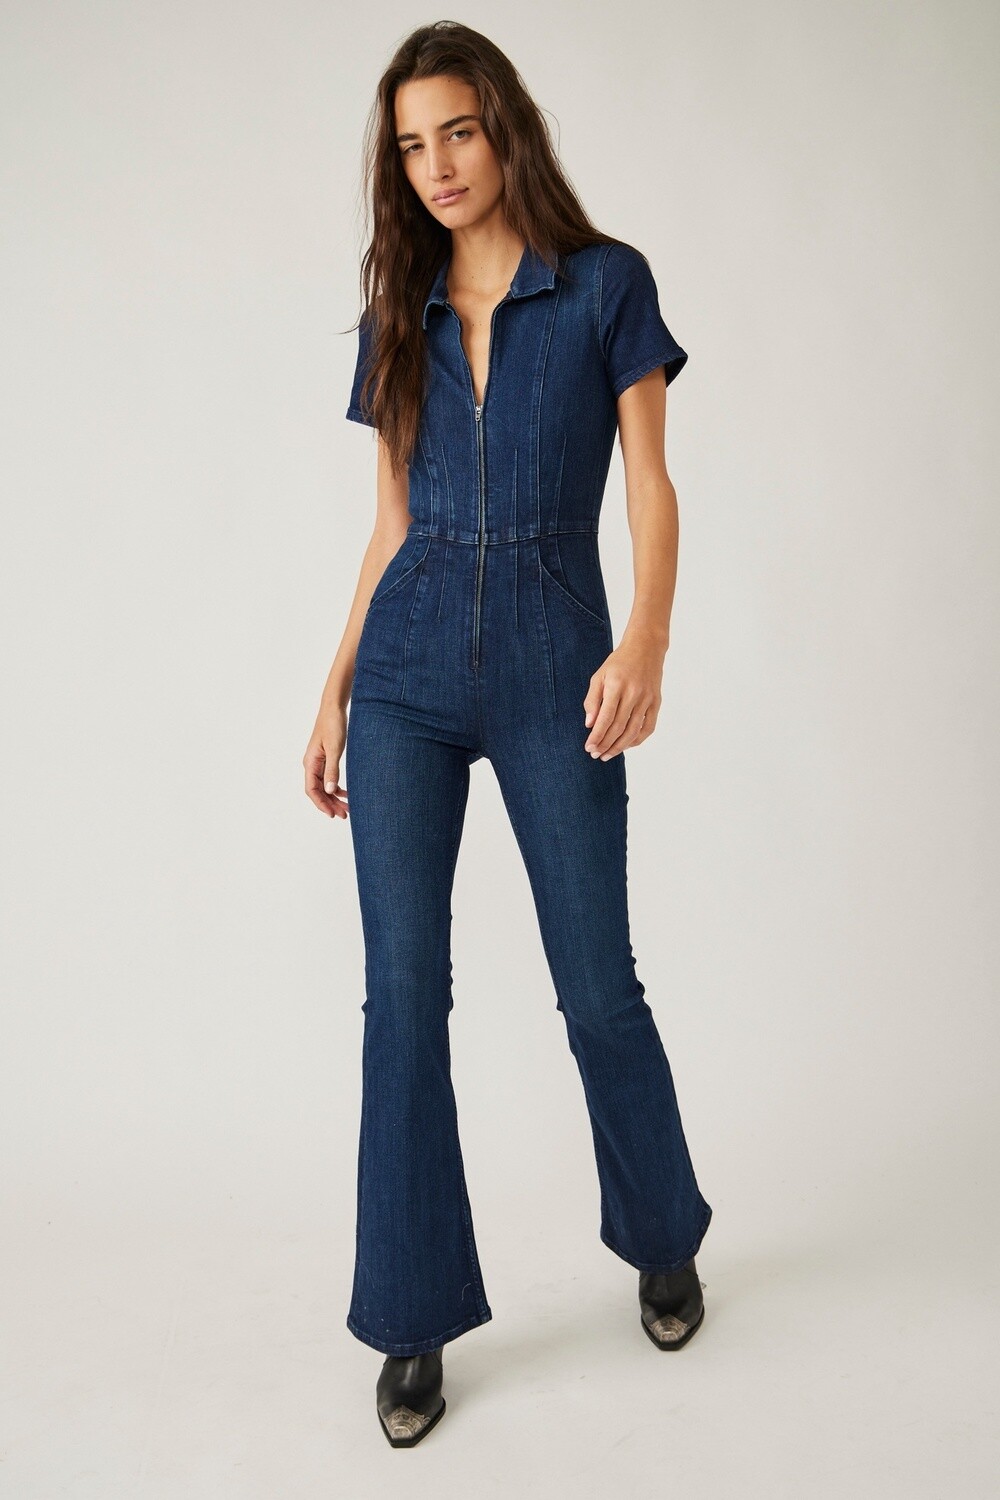 Jayde Flare Jumpsuit, Size: Small